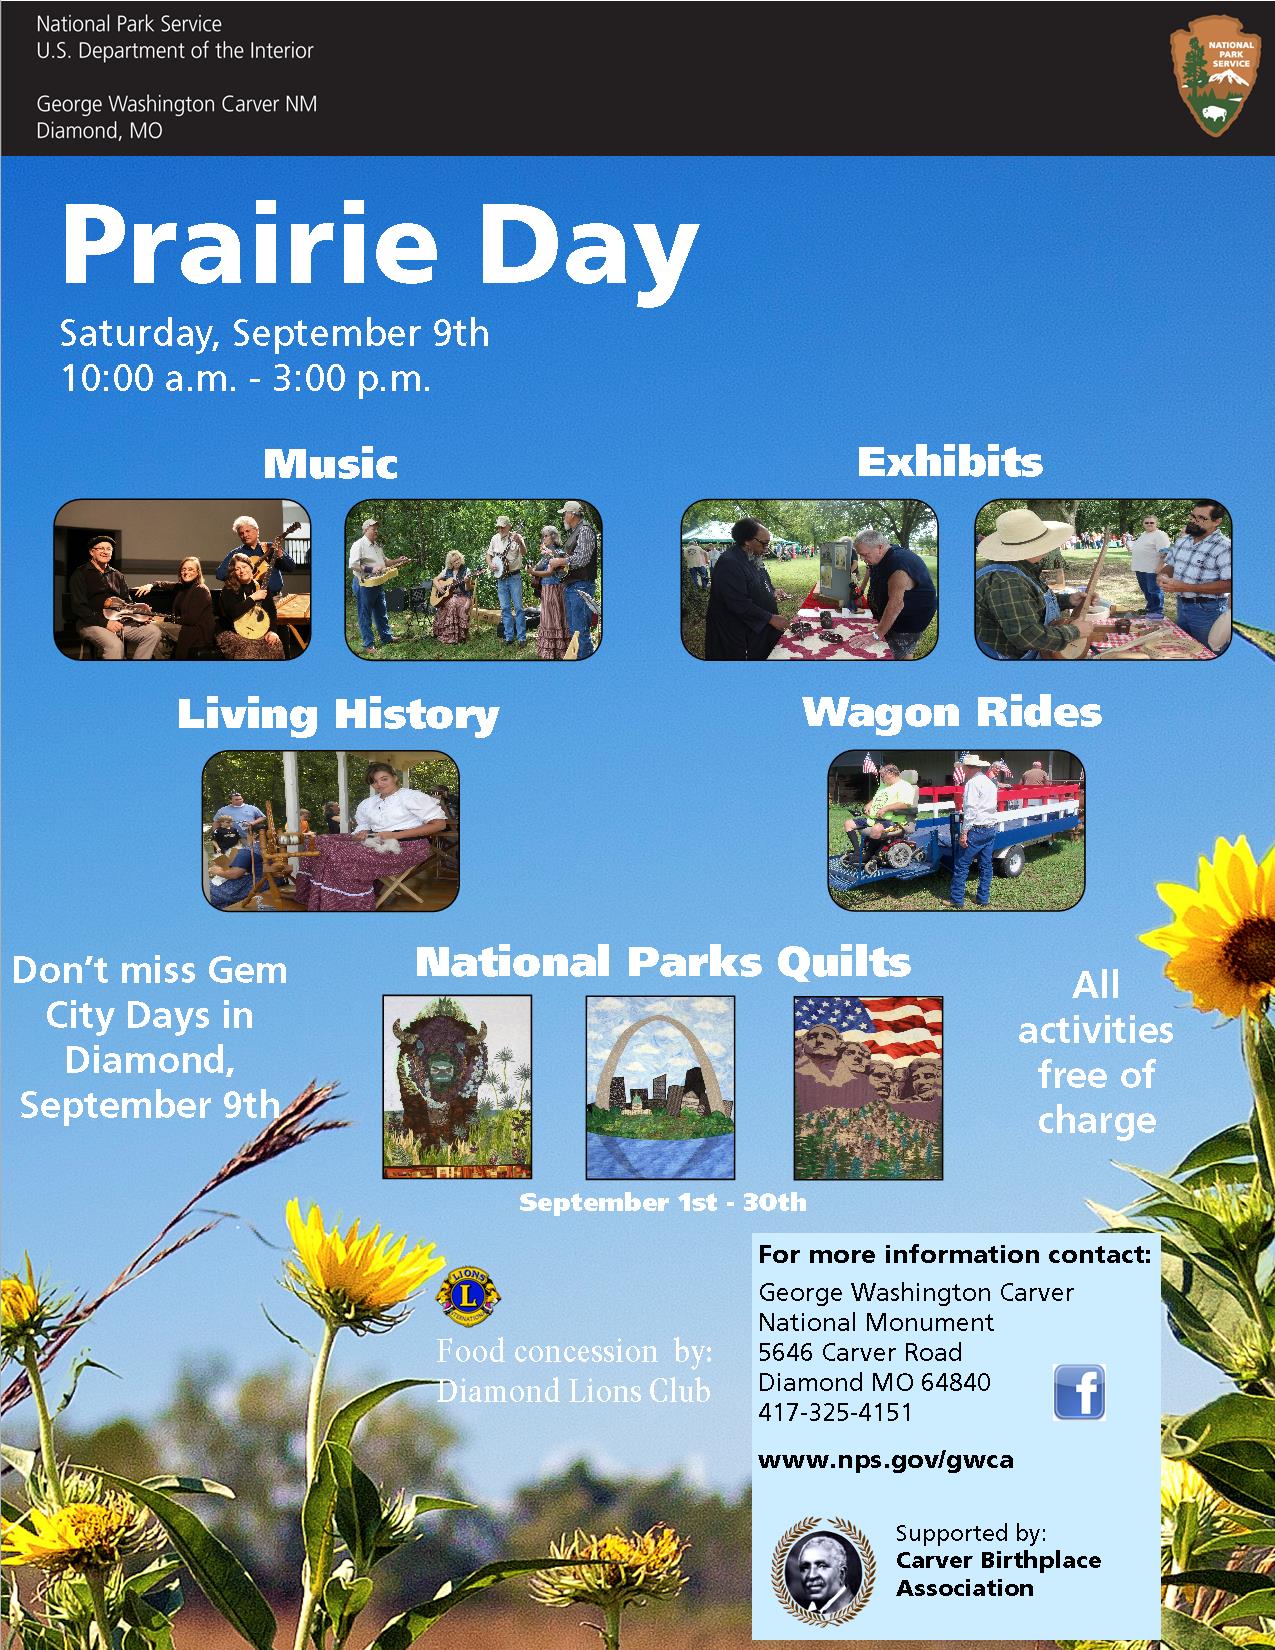 The photograph is a poster for a special event at the park. The image includes activities for the event: exhibitors, wagon rides, living history demonstrations.